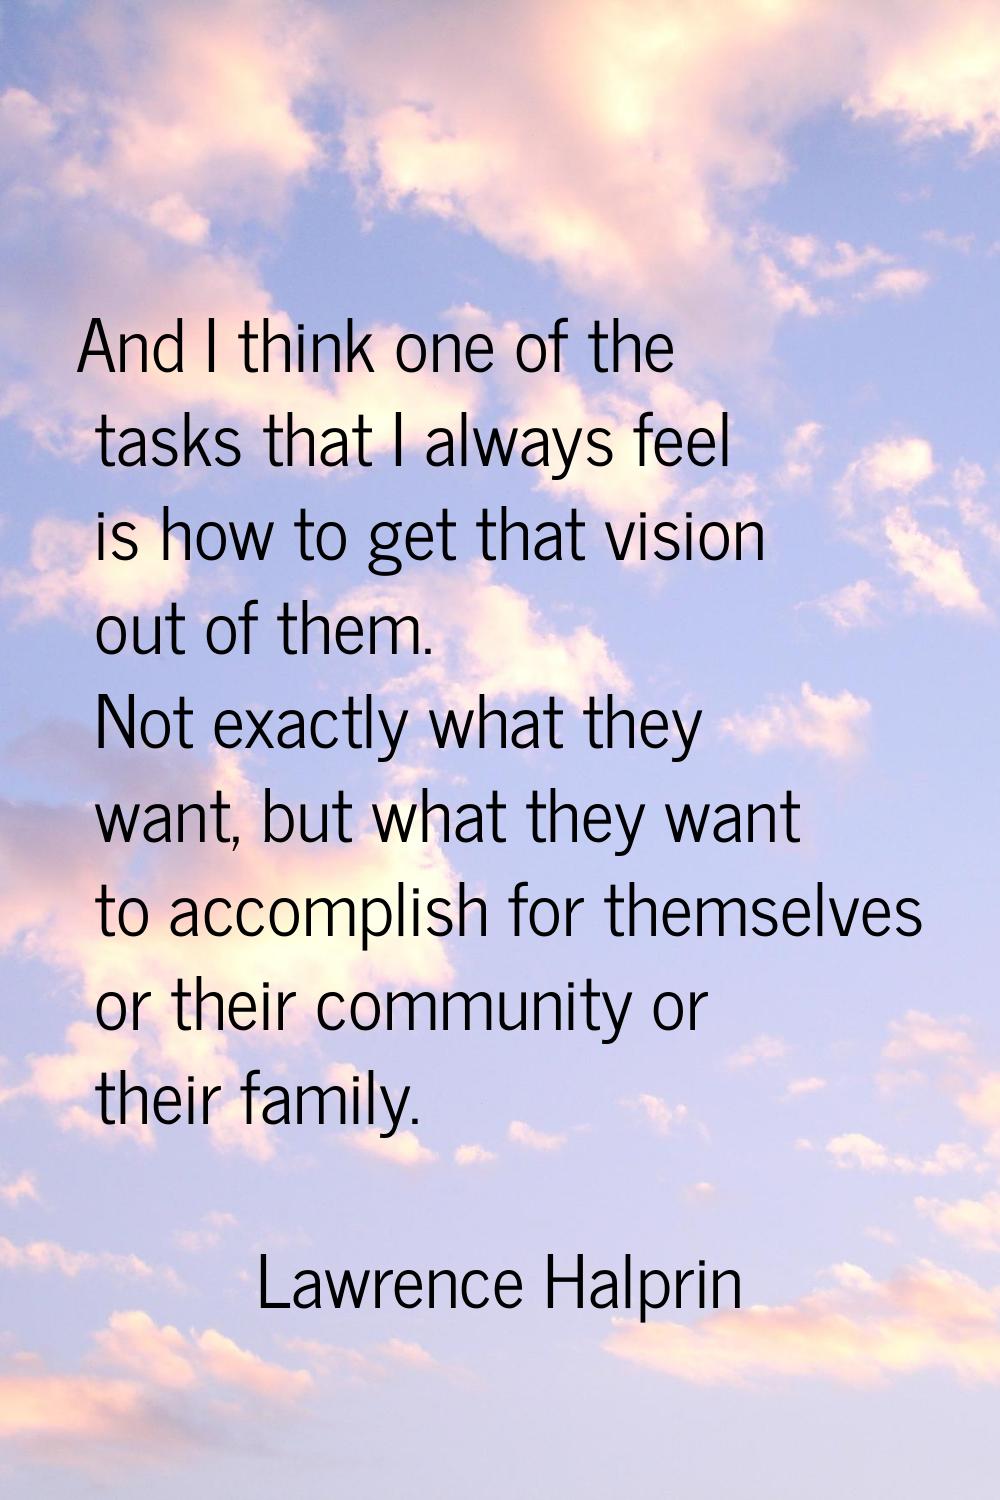 And I think one of the tasks that I always feel is how to get that vision out of them. Not exactly 